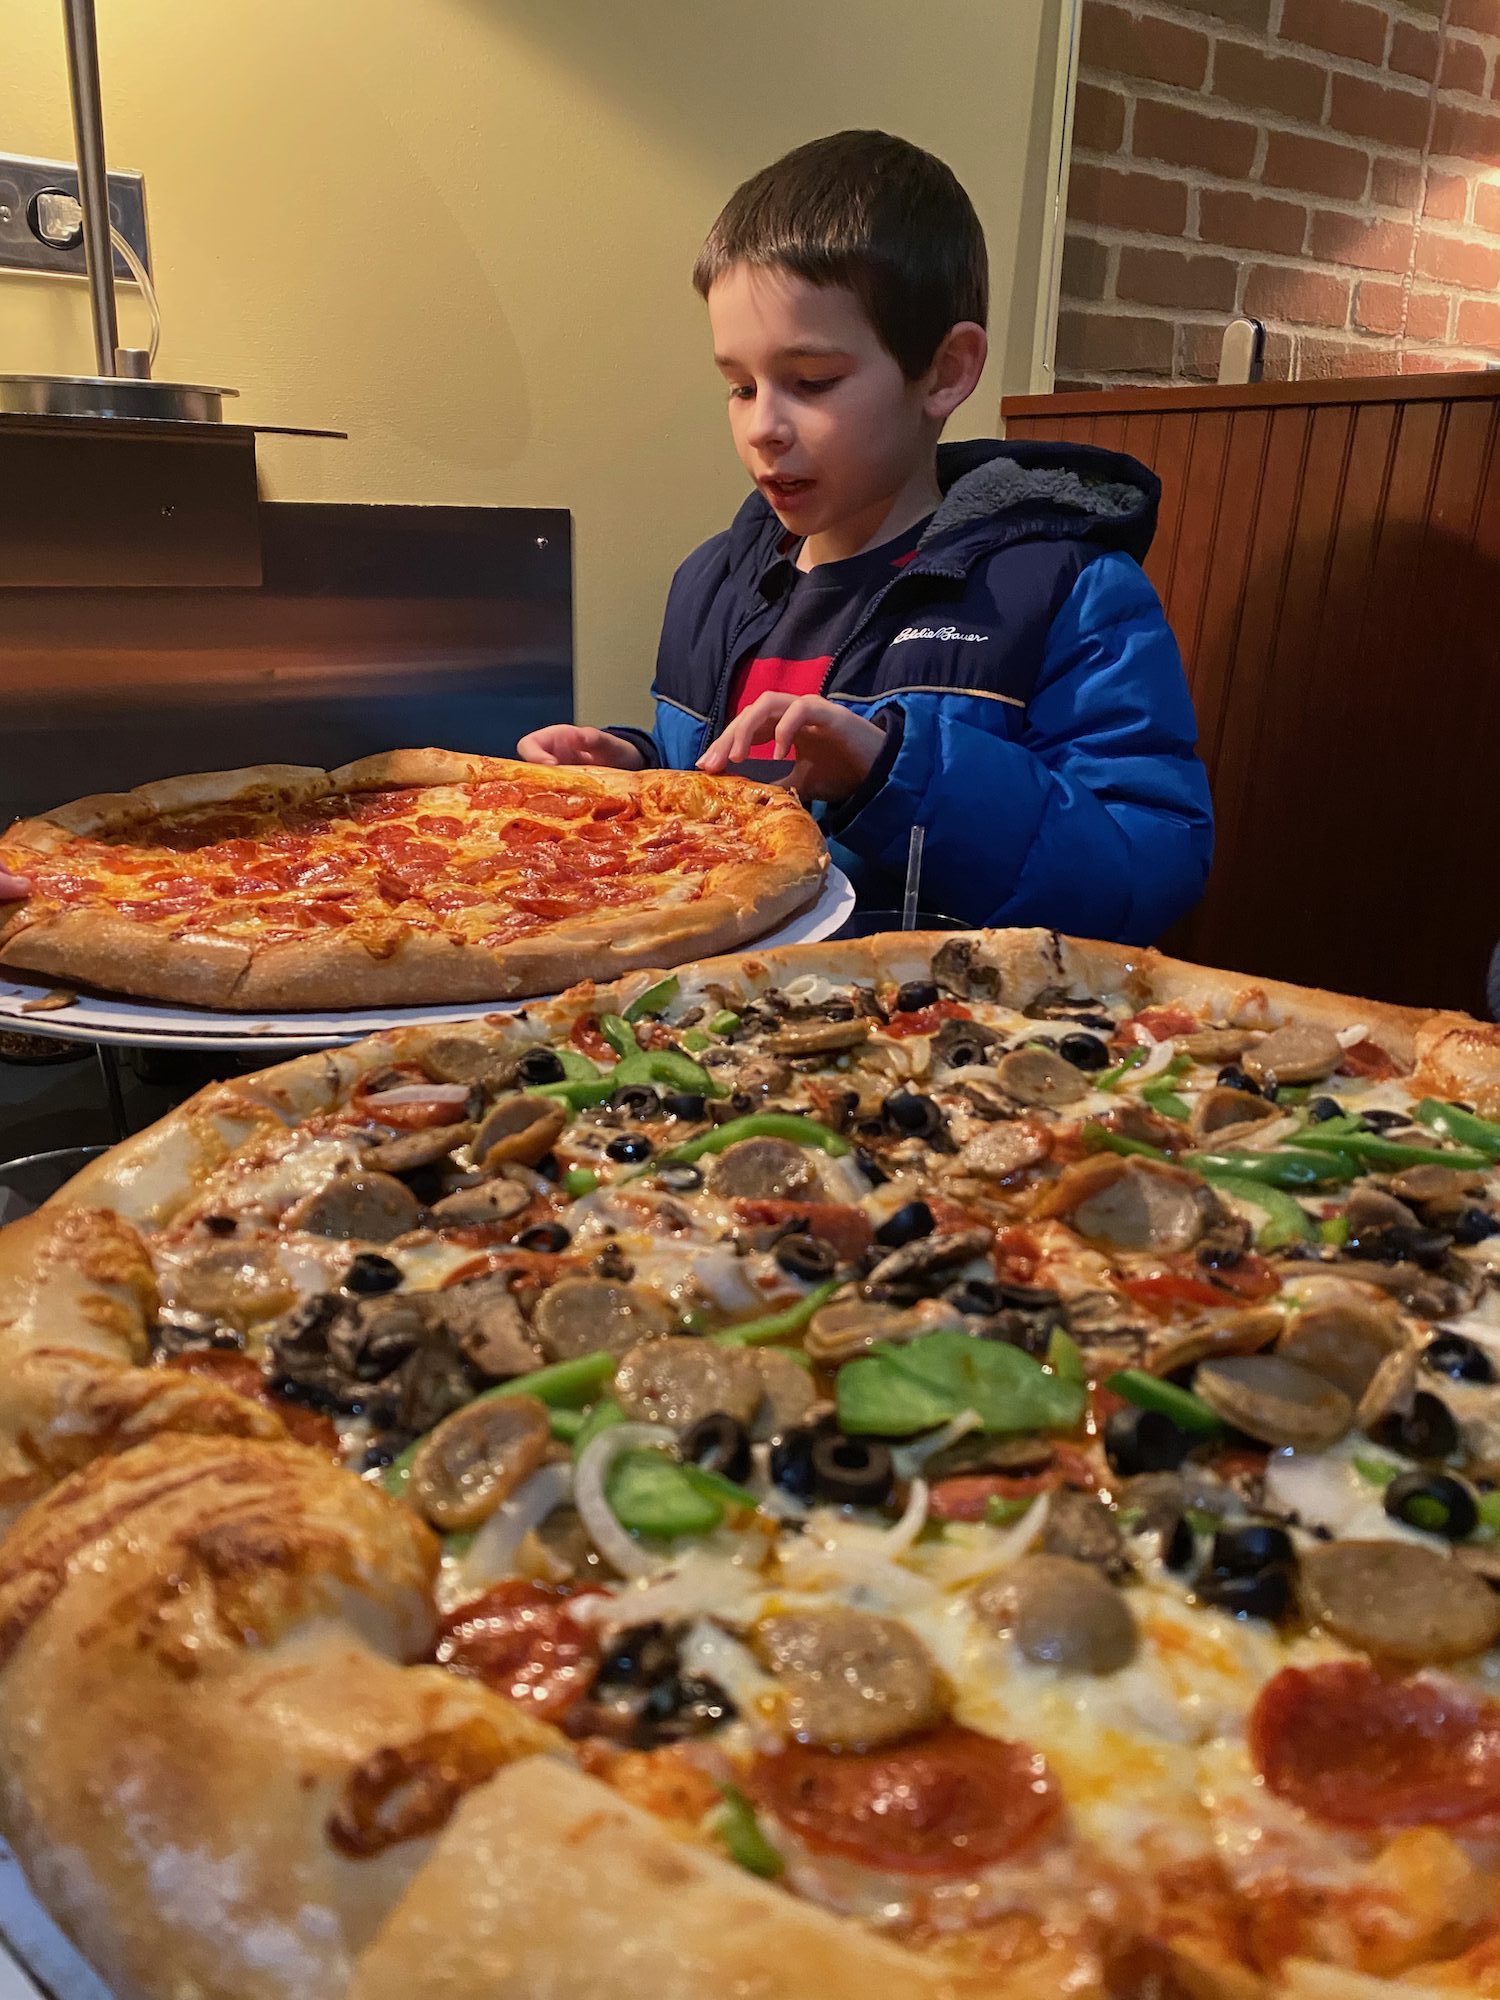 Two large pizzas and a boy taking a piece inside Dewey's Pizza restaurant.  